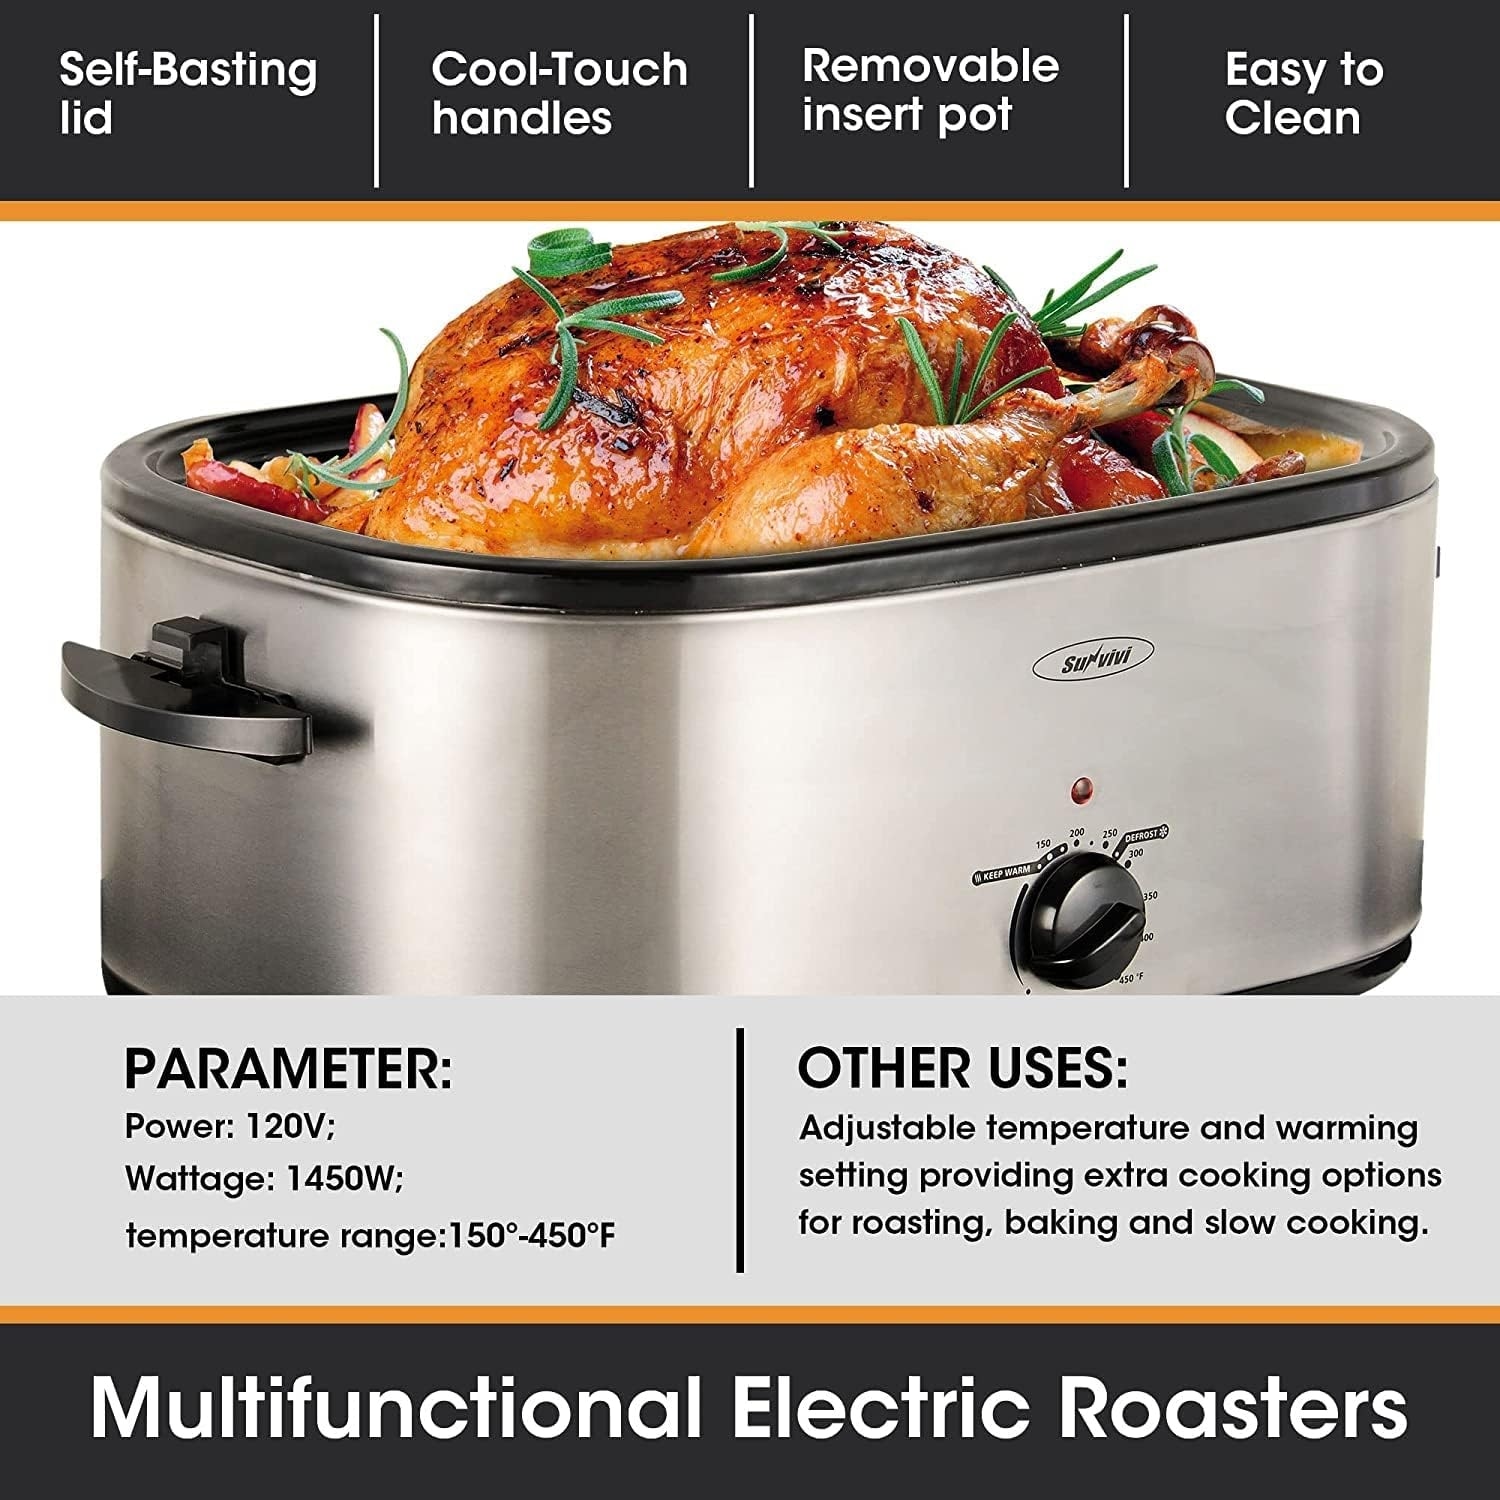 Royalcraft Roaster Oven with Removable Pan - Bed Bath & Beyond - 36335127